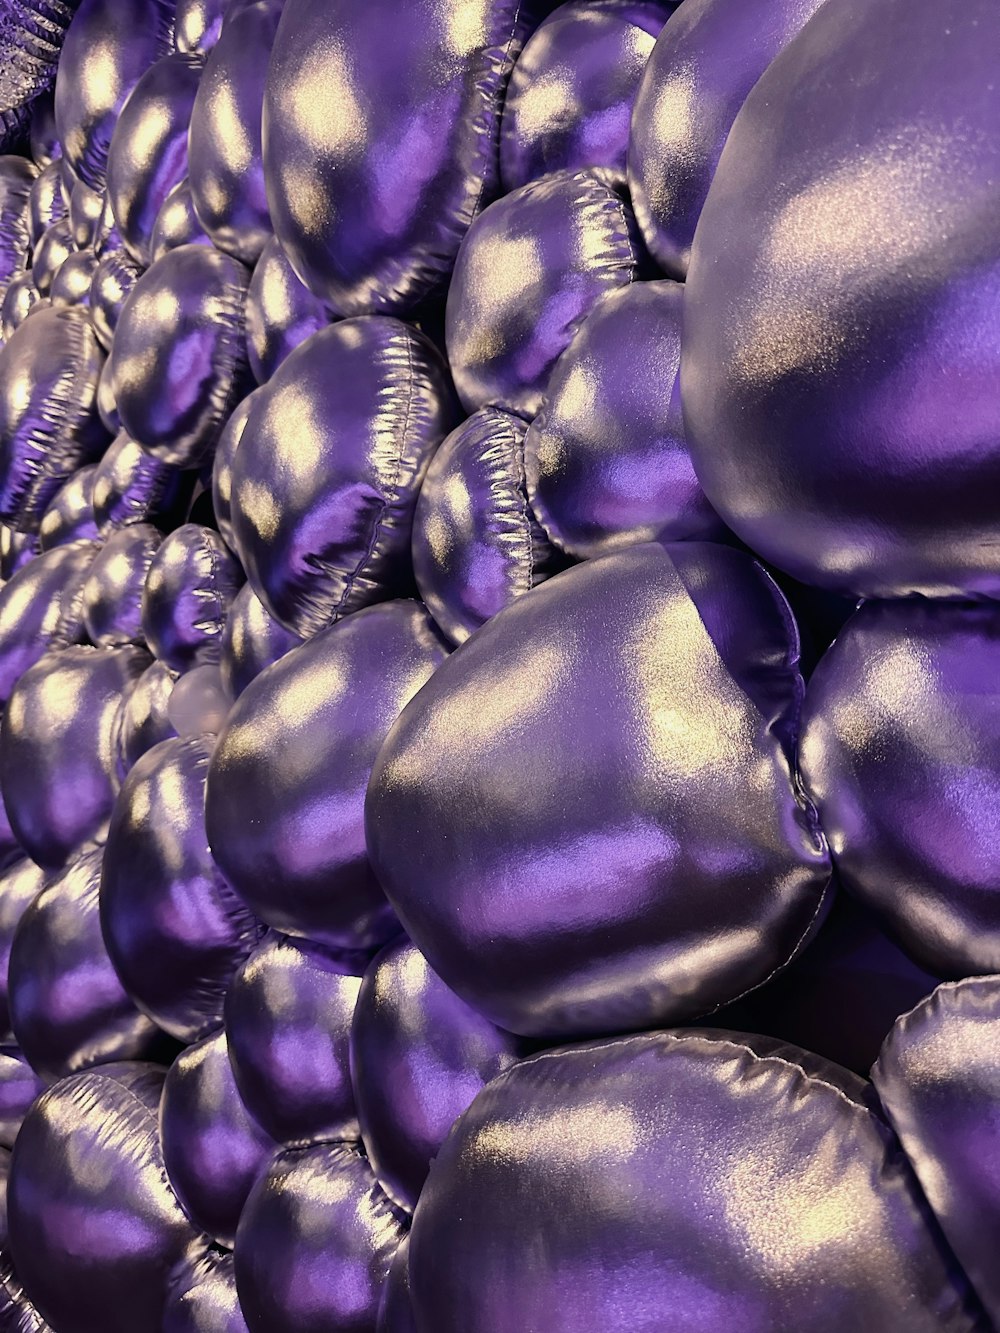 a large pile of shiny purple balloons